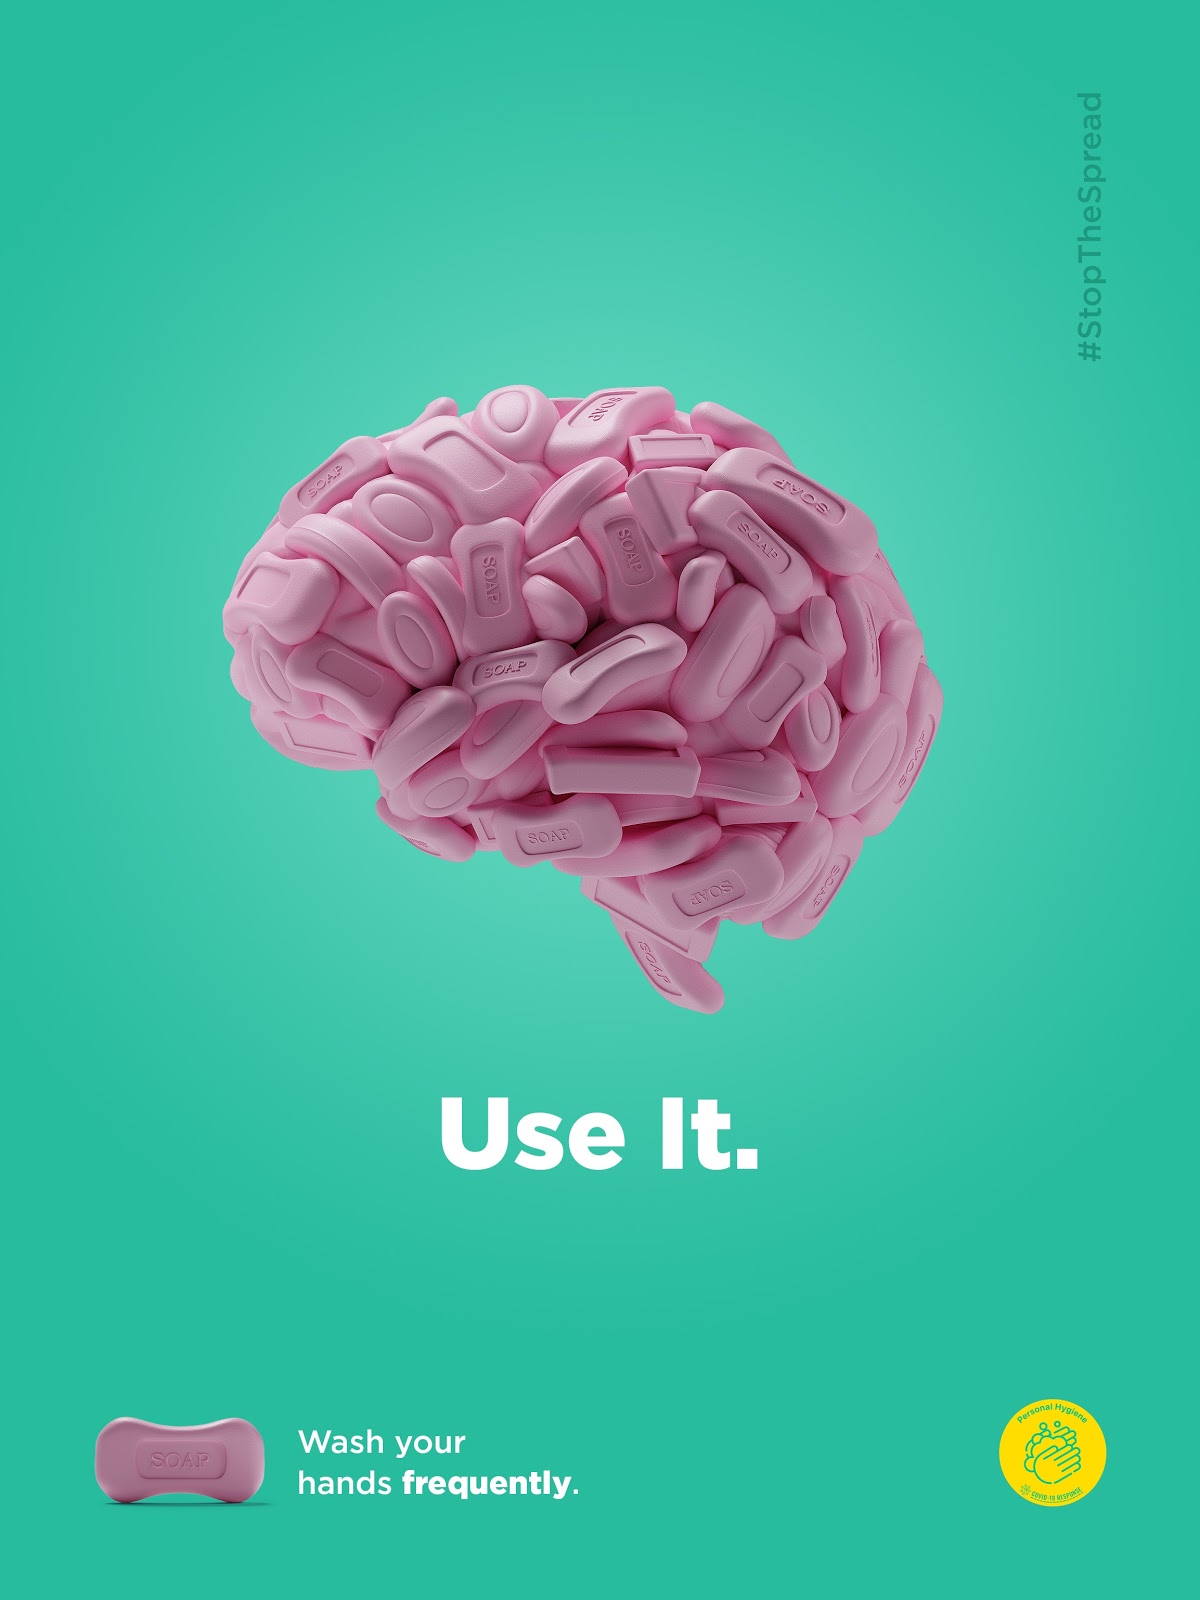 Ashot Hovakimyan's submission to the United Nations Covid-19 Global Call Out to Creatives illustrates a brain composed of soap bars to highlight that people should rely on their judgement and wash their hands frequently.